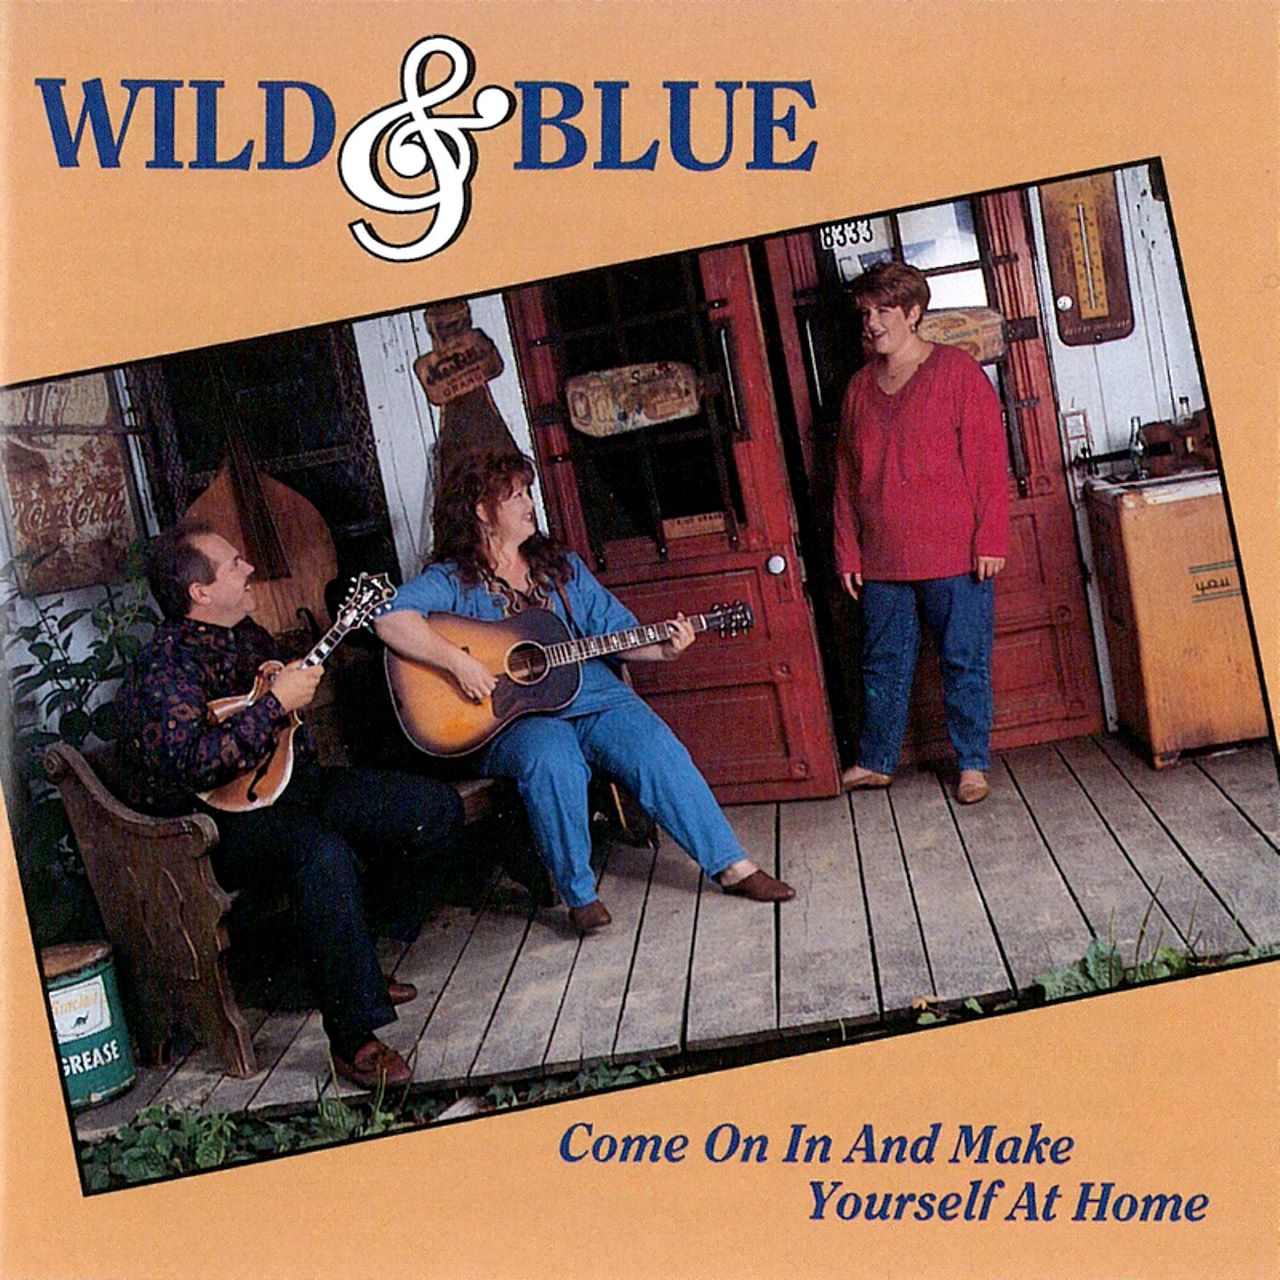 Wild & Blue - Come On In And Make Yourself At Home cover album